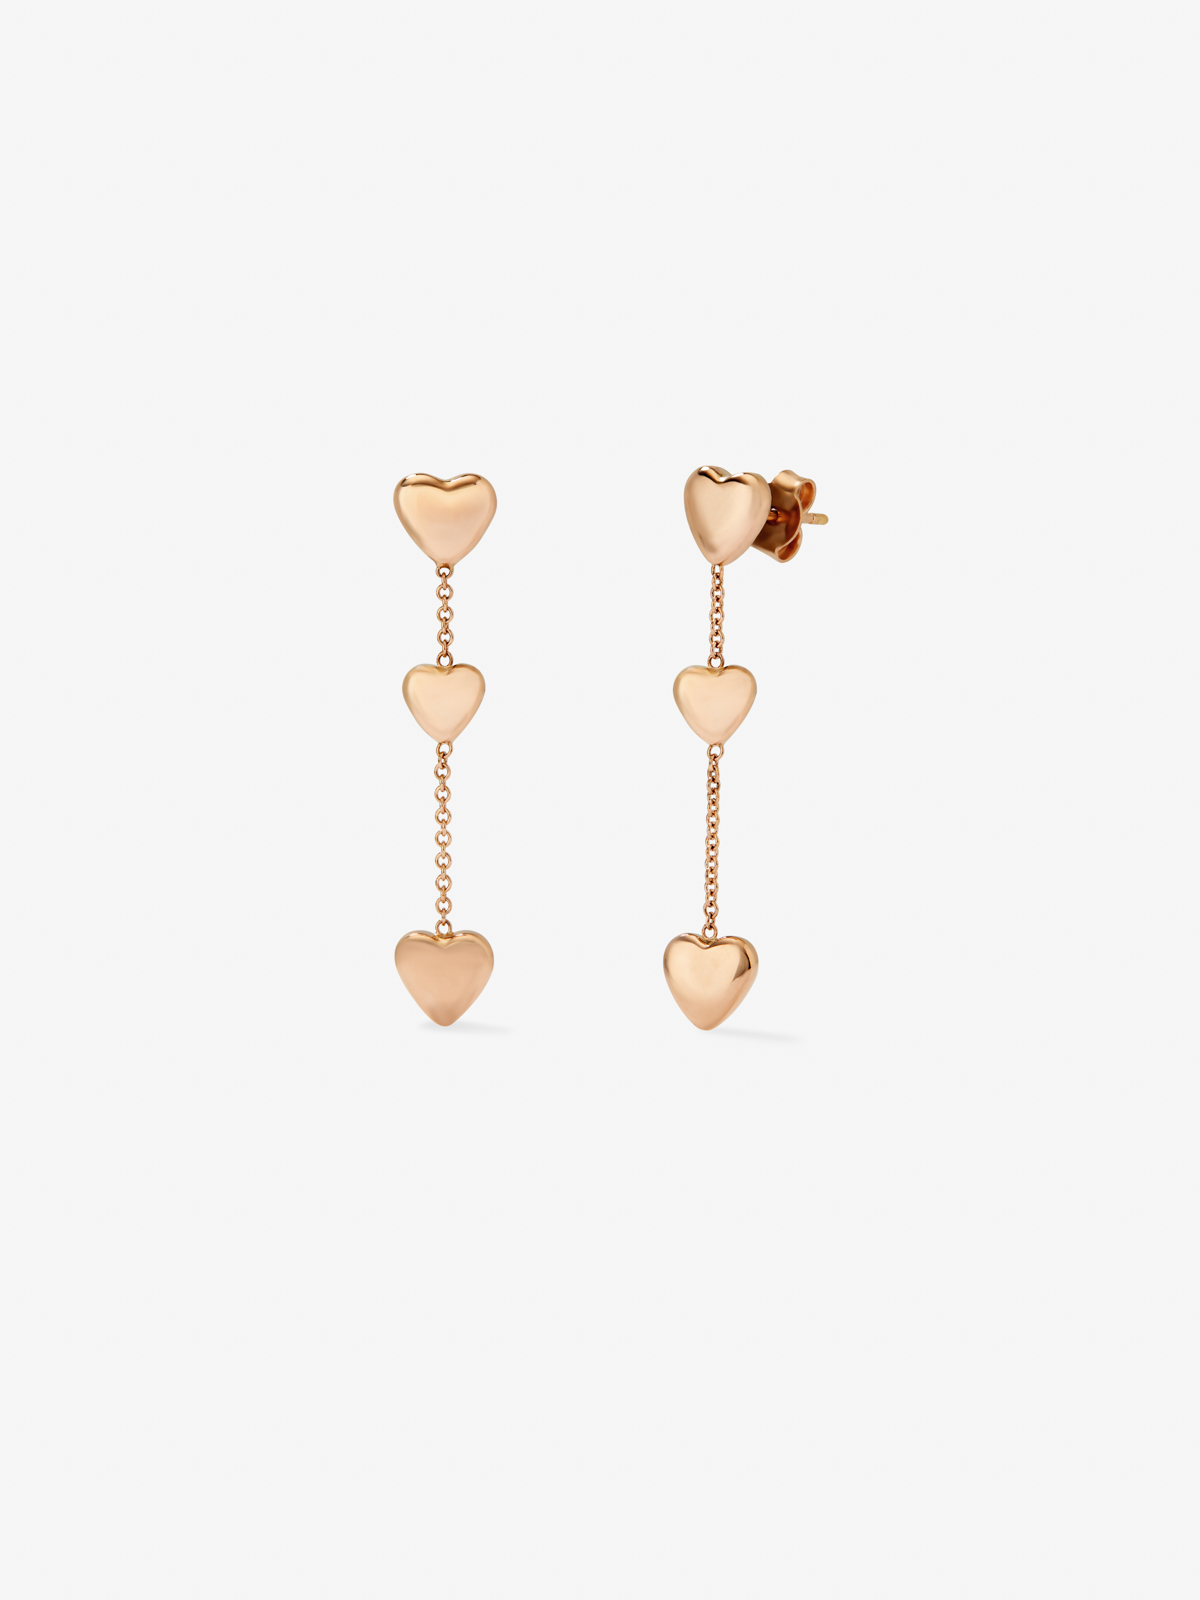 18K rose gold earrings with hearts